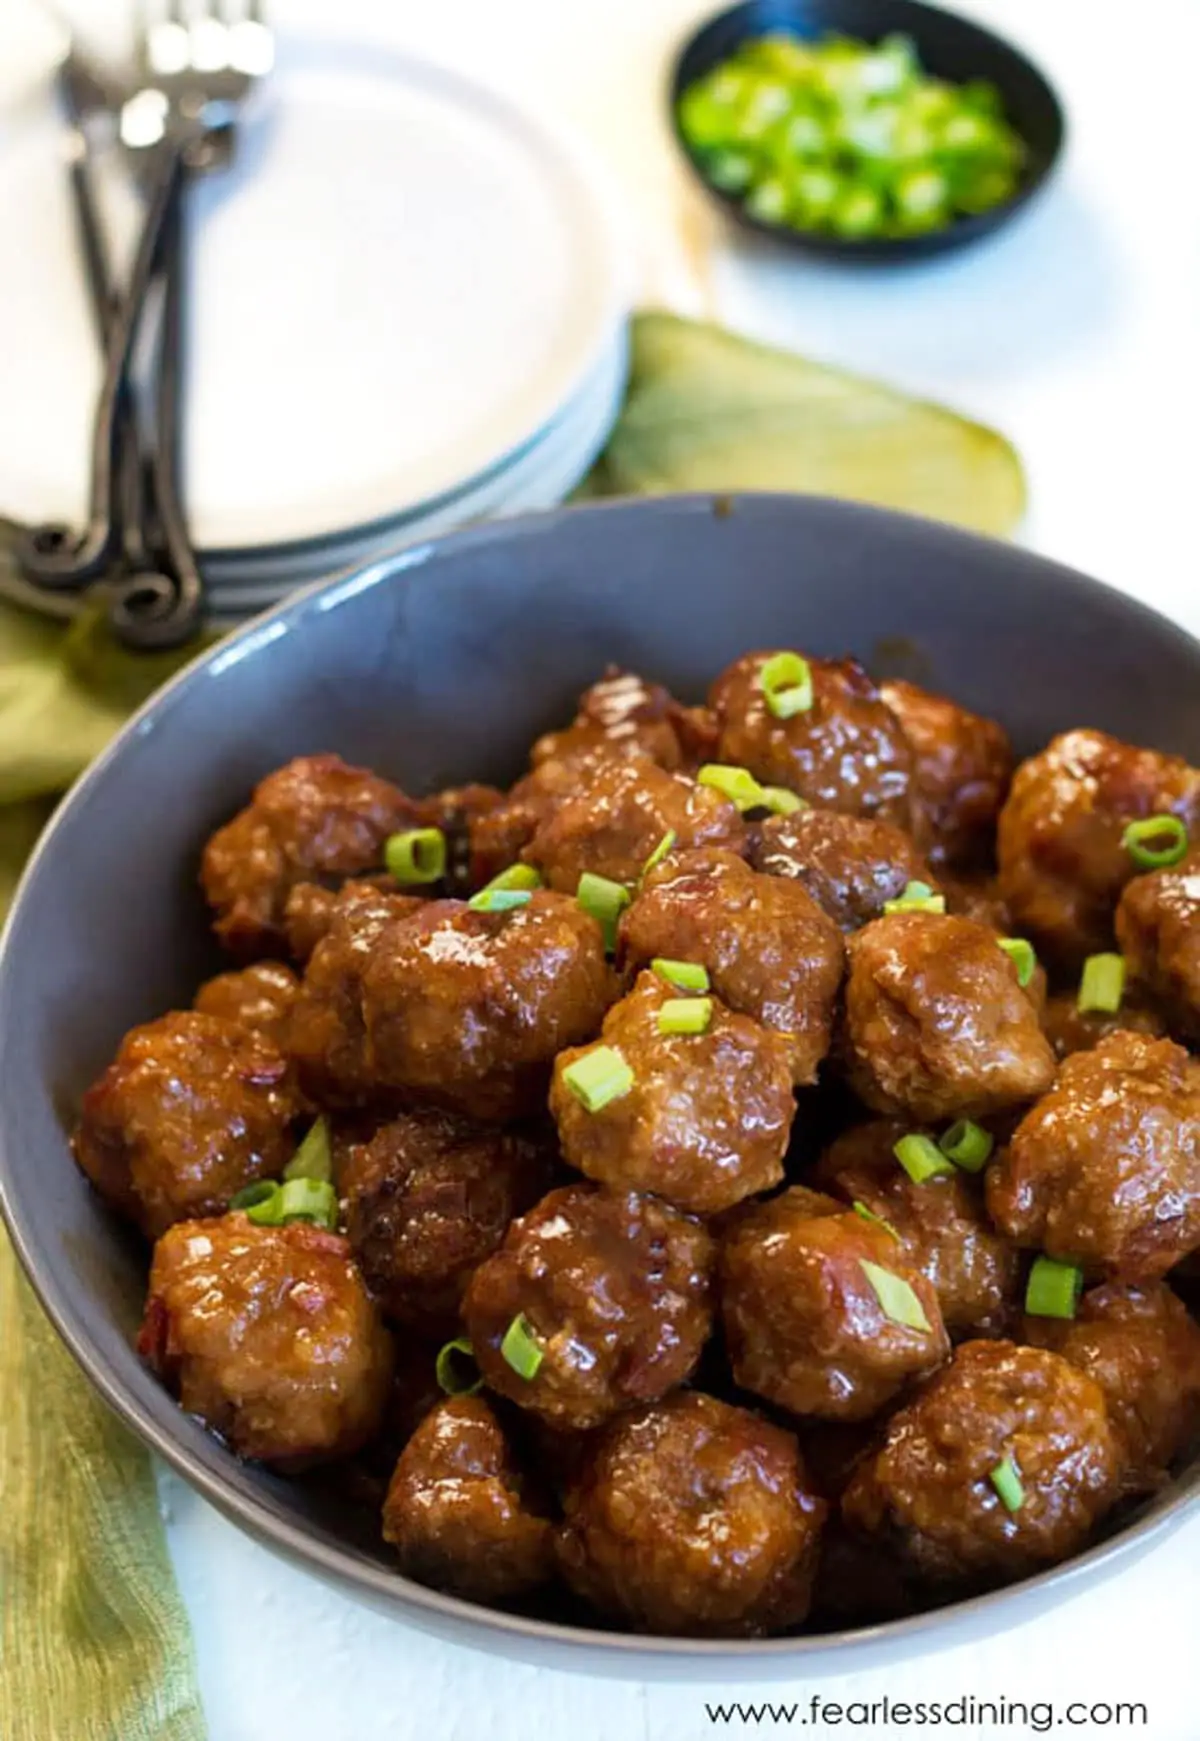 a large grey bowl full of meatballs. They are garnished with scallions